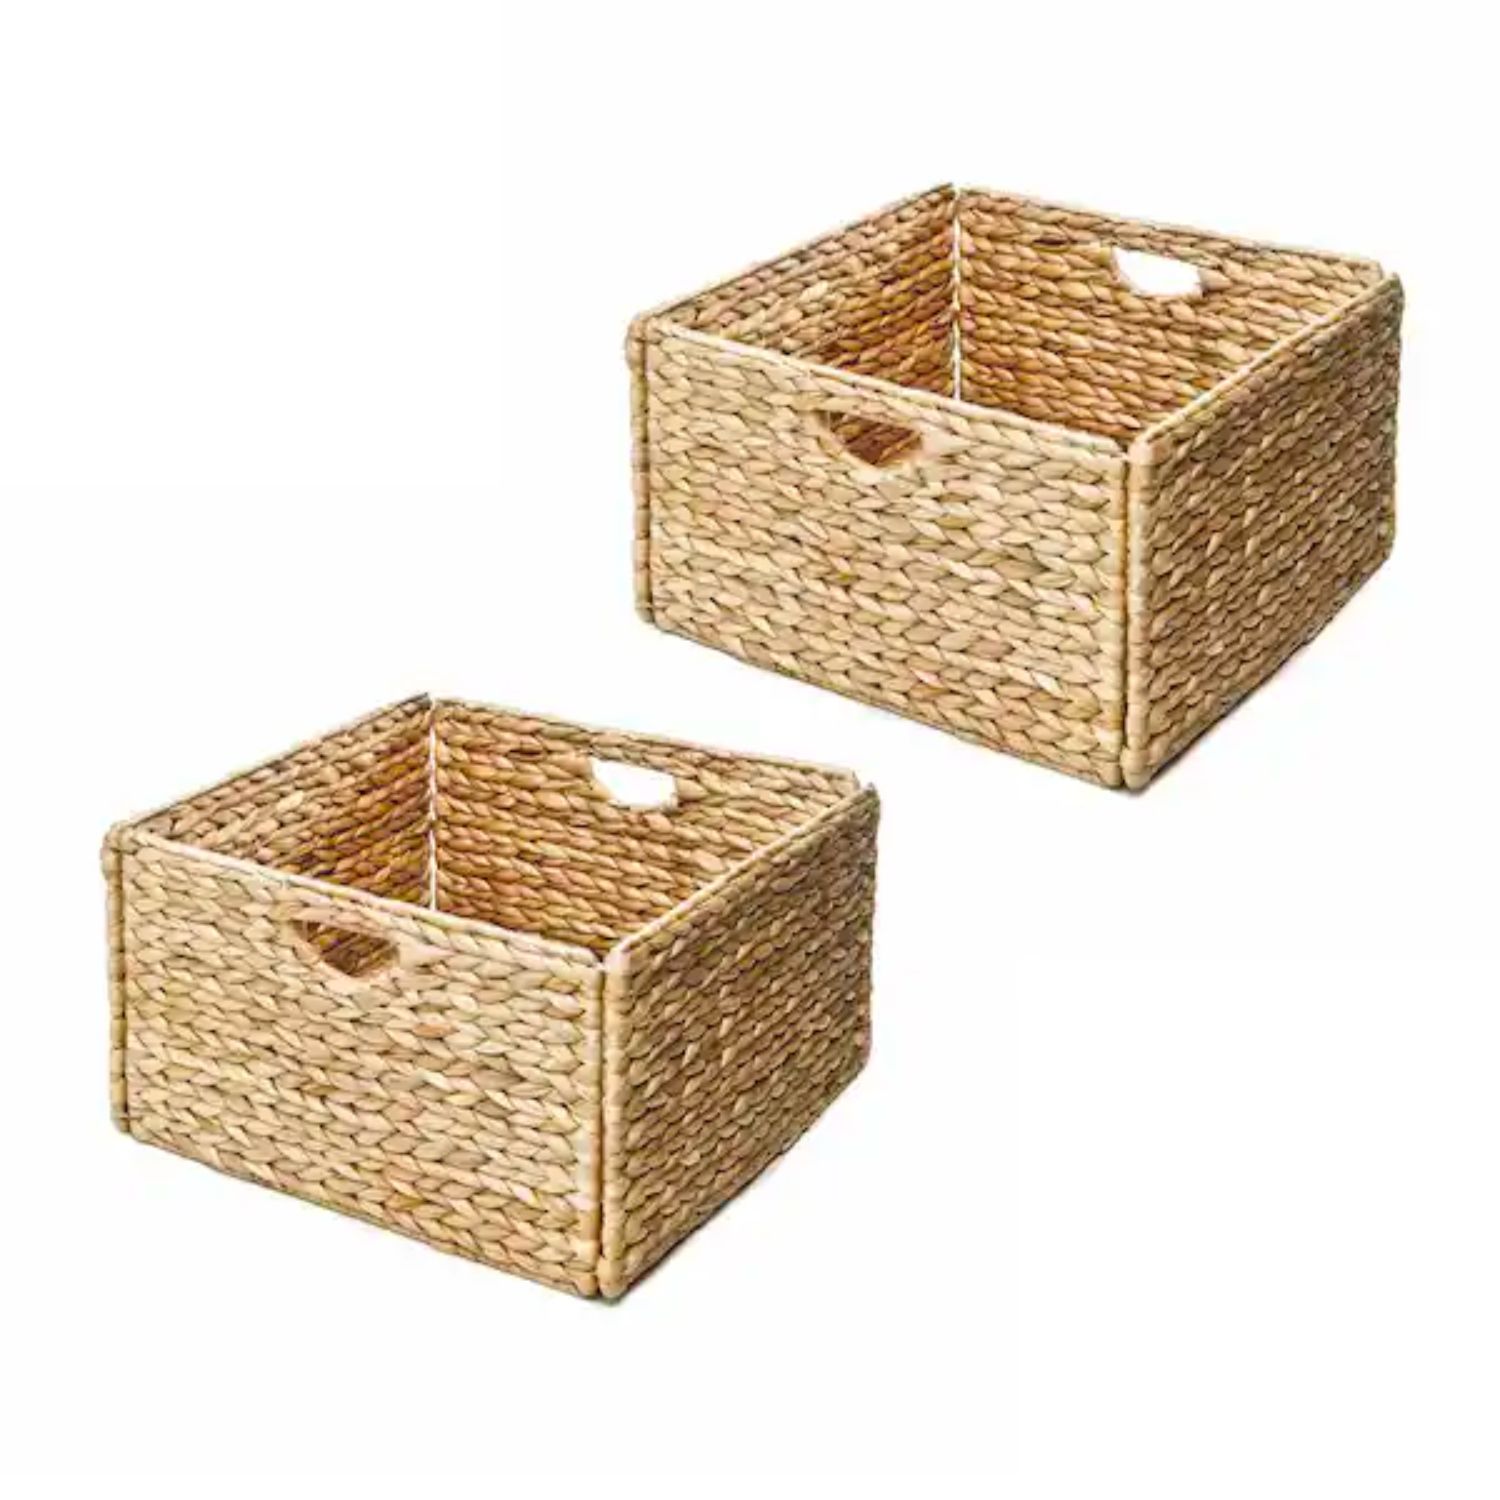 The Best entryway Decor For a Summer Refresh Option: Seville Classics Water Hyacinth Storage Baskets